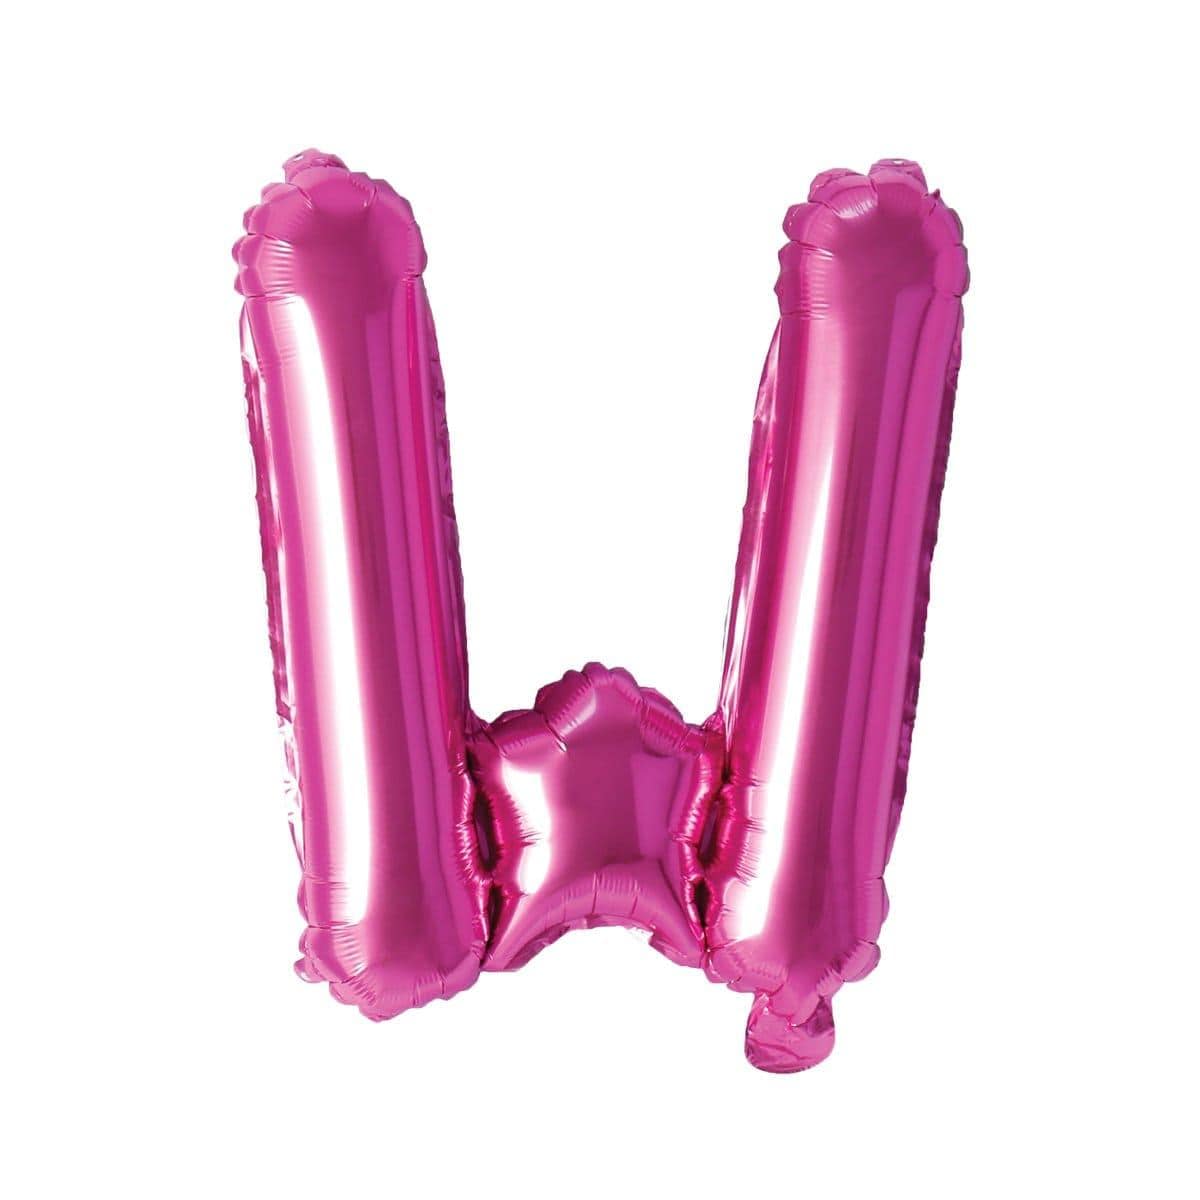 Buy Balloons Pink Letter W Foil Balloon, 16 Inches sold at Party Expert